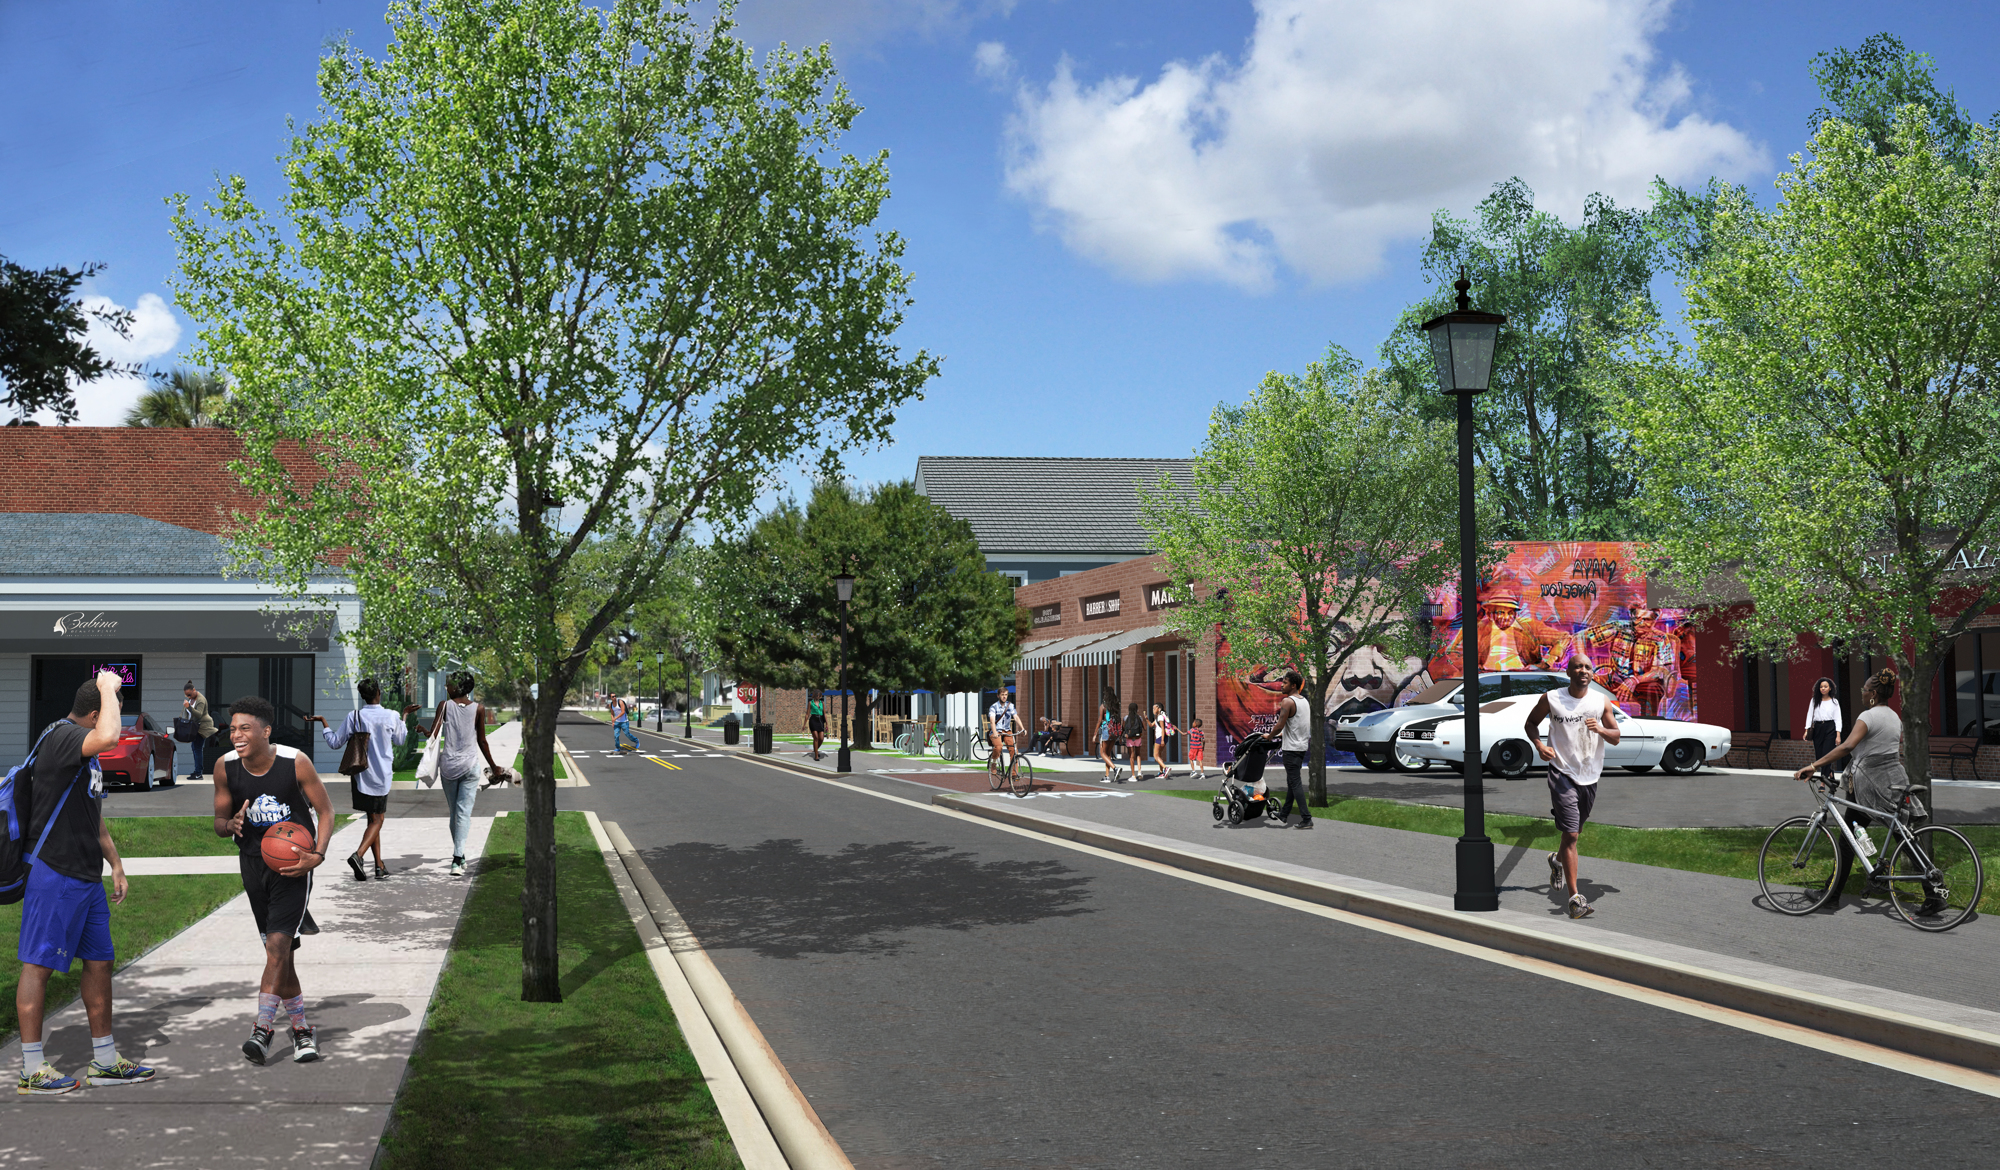 Town planners presented a vision for Center Street that includes sidewalks, underground wires, thriving businesses and landscaping.